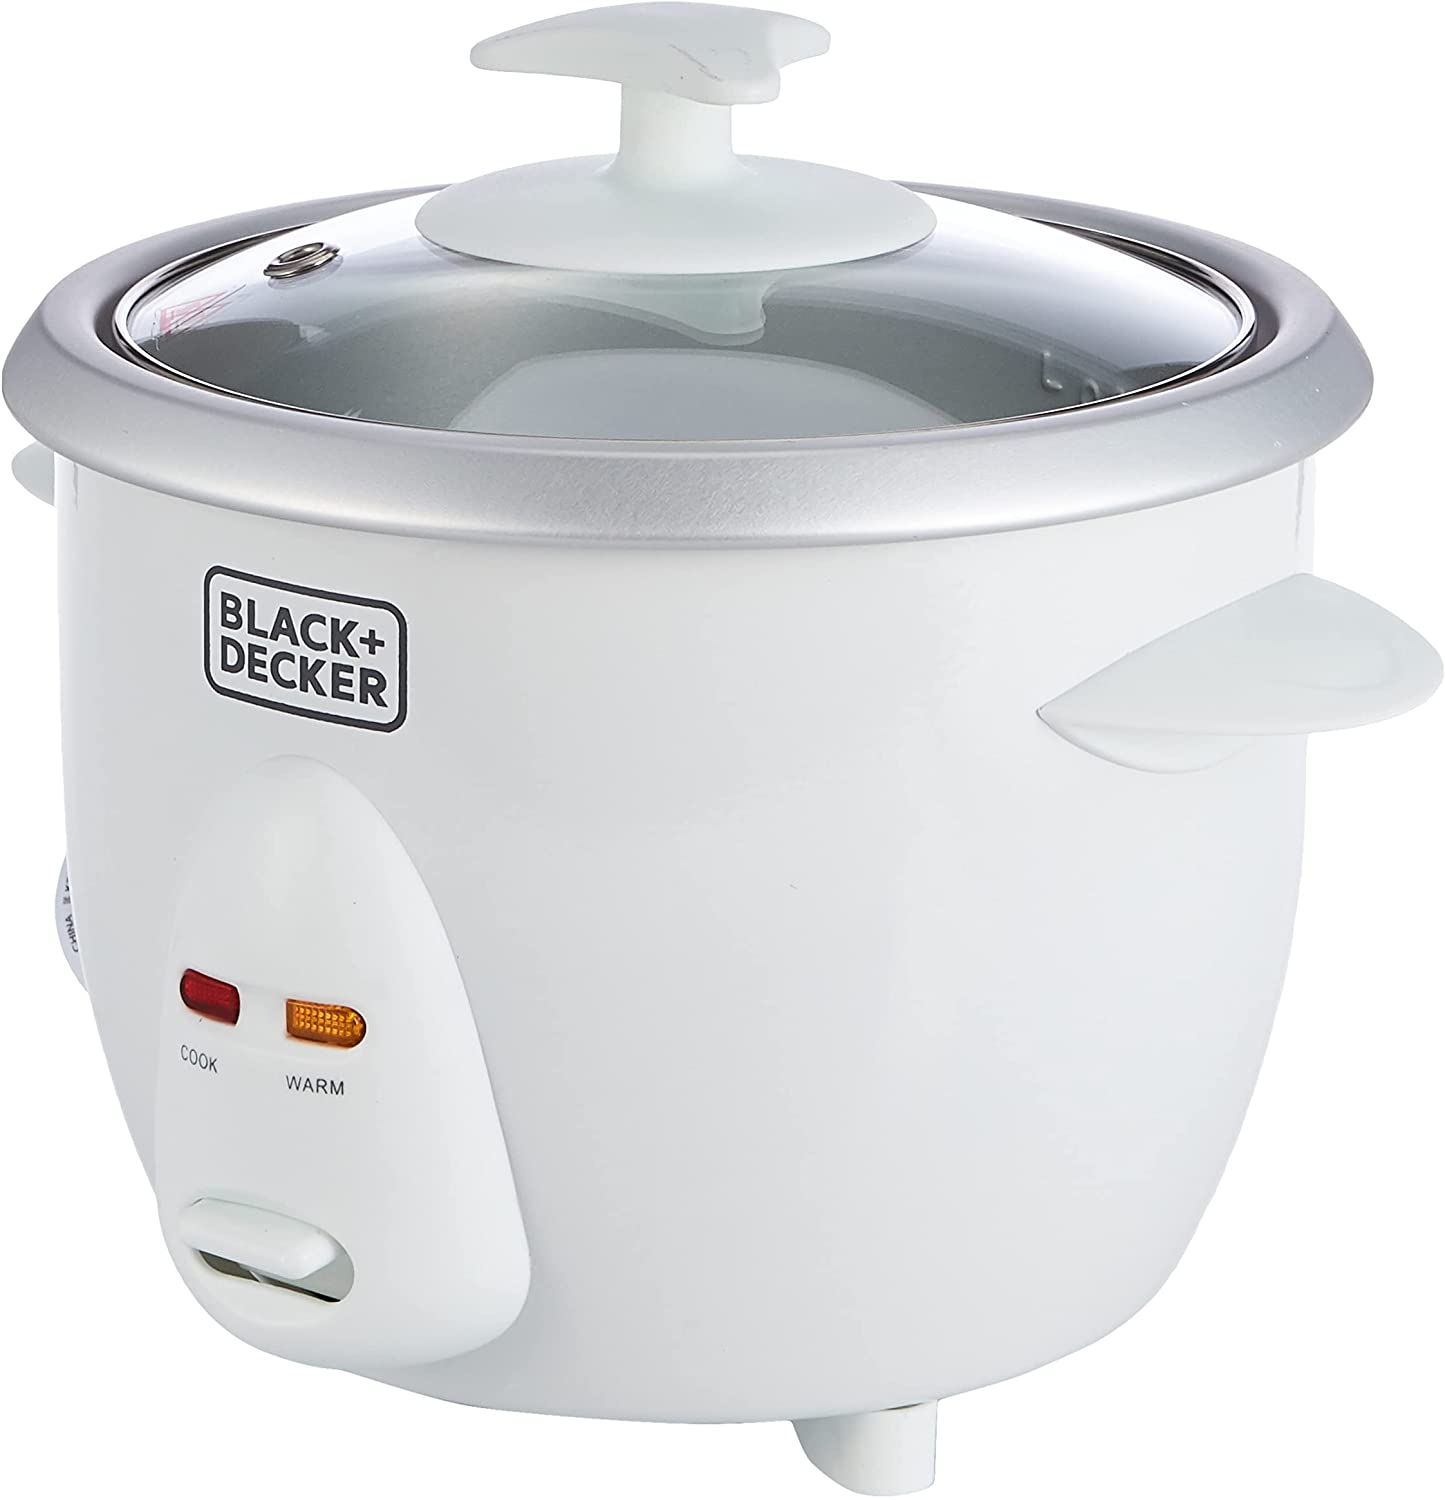 https://www.dvdoverseas.com/resize/Shared/Images/Product/Black-And-Decker-RC650-220-Volt-3-Cup-Rice-Cooker-220V-240V-For-Export/RC350.jpg